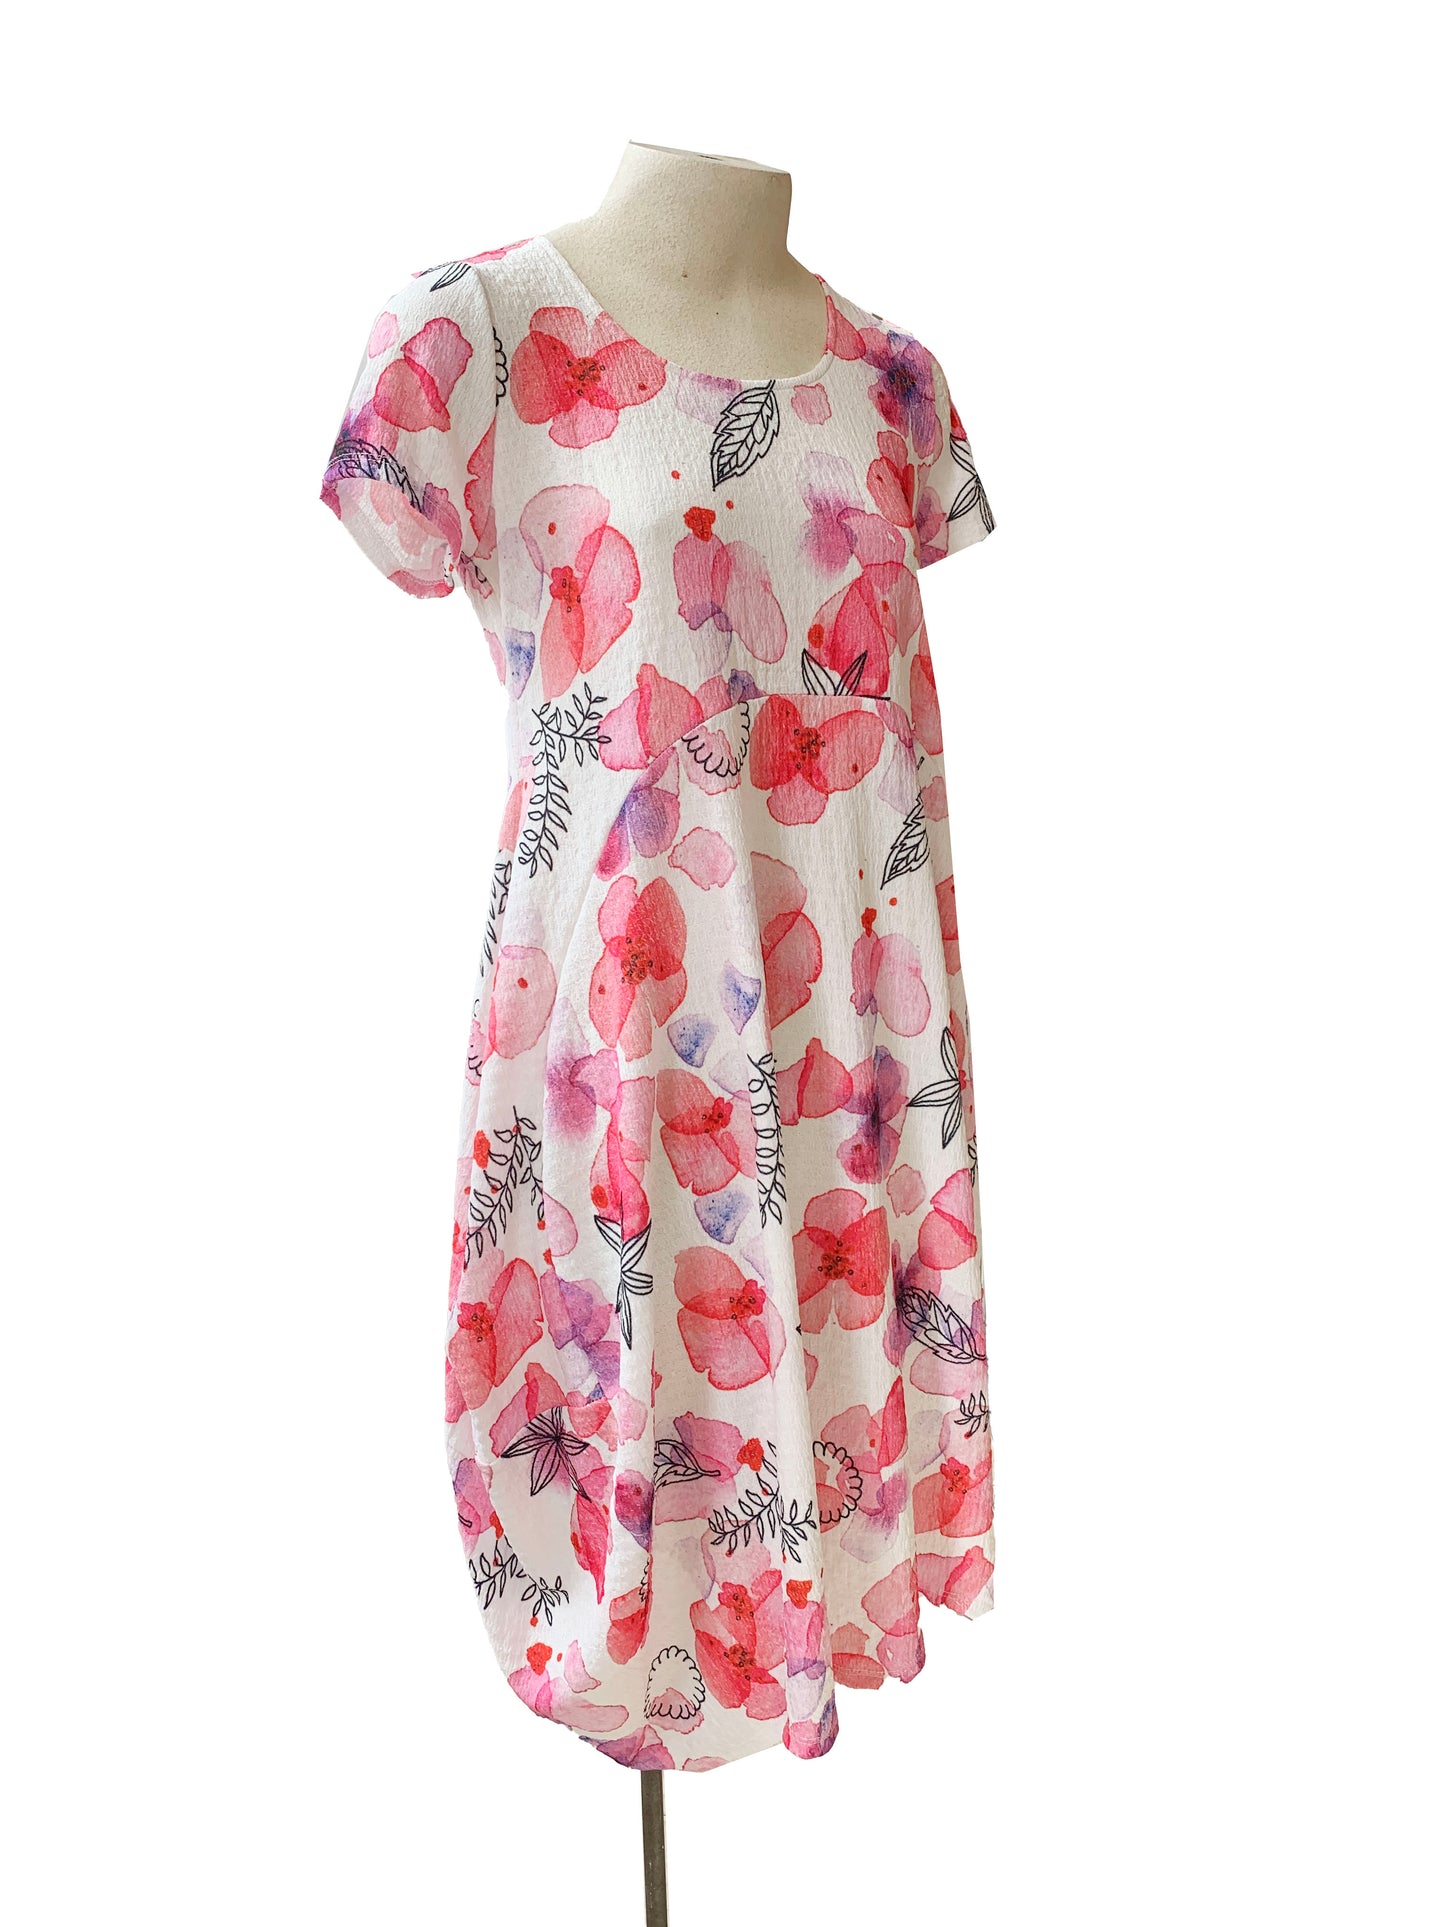 Maddy Dress by Compli K, Pink Floral, short sleeves, round neck, arched seams across the bodice, rounded hem, below the knee, sizes XS to XXL, made in Montreal 